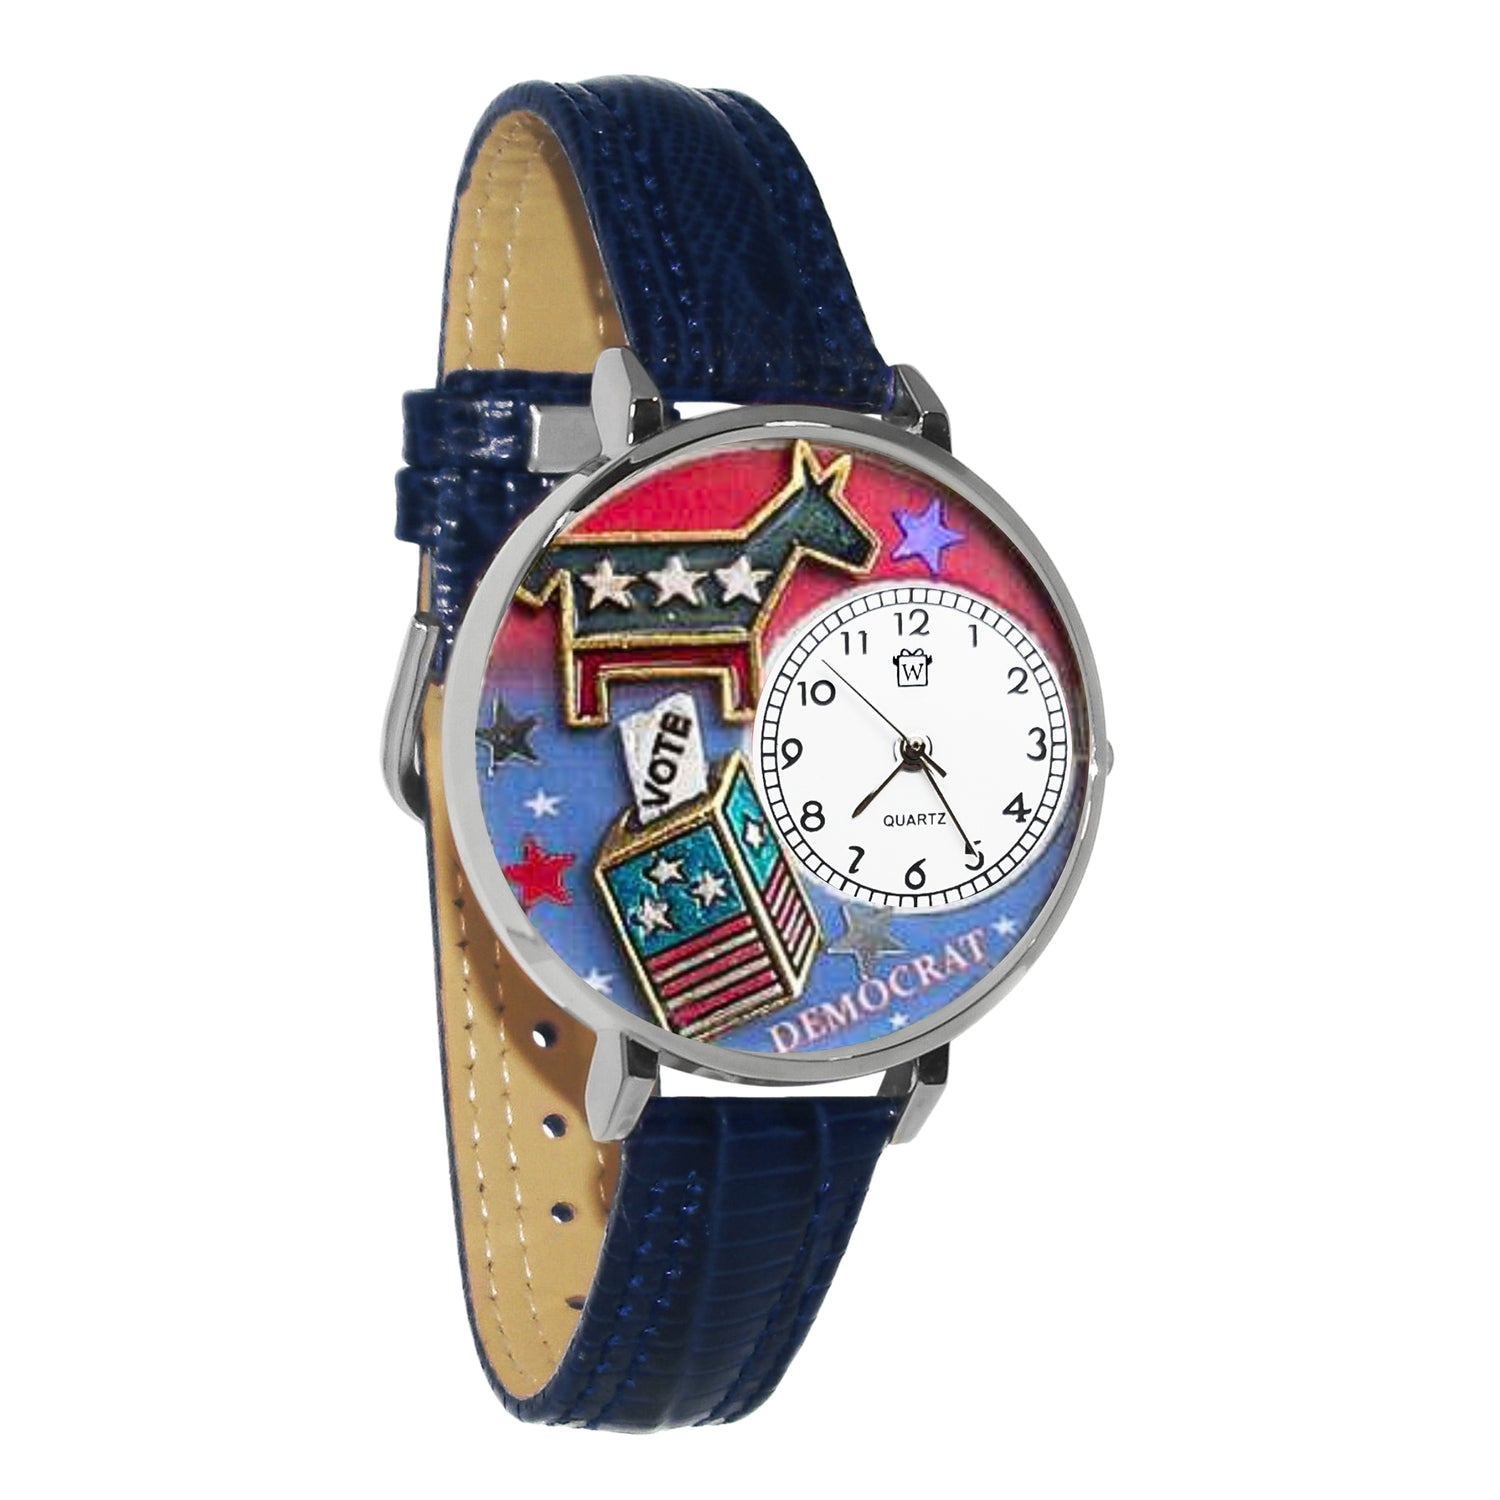 Whimsical Gifts | Democrat 3D Watch Large Style | Handmade in USA | Patriotic |  | Novelty Unique Fun Miniatures Gift | Silver Finish Navy Blue Leather Watch Band